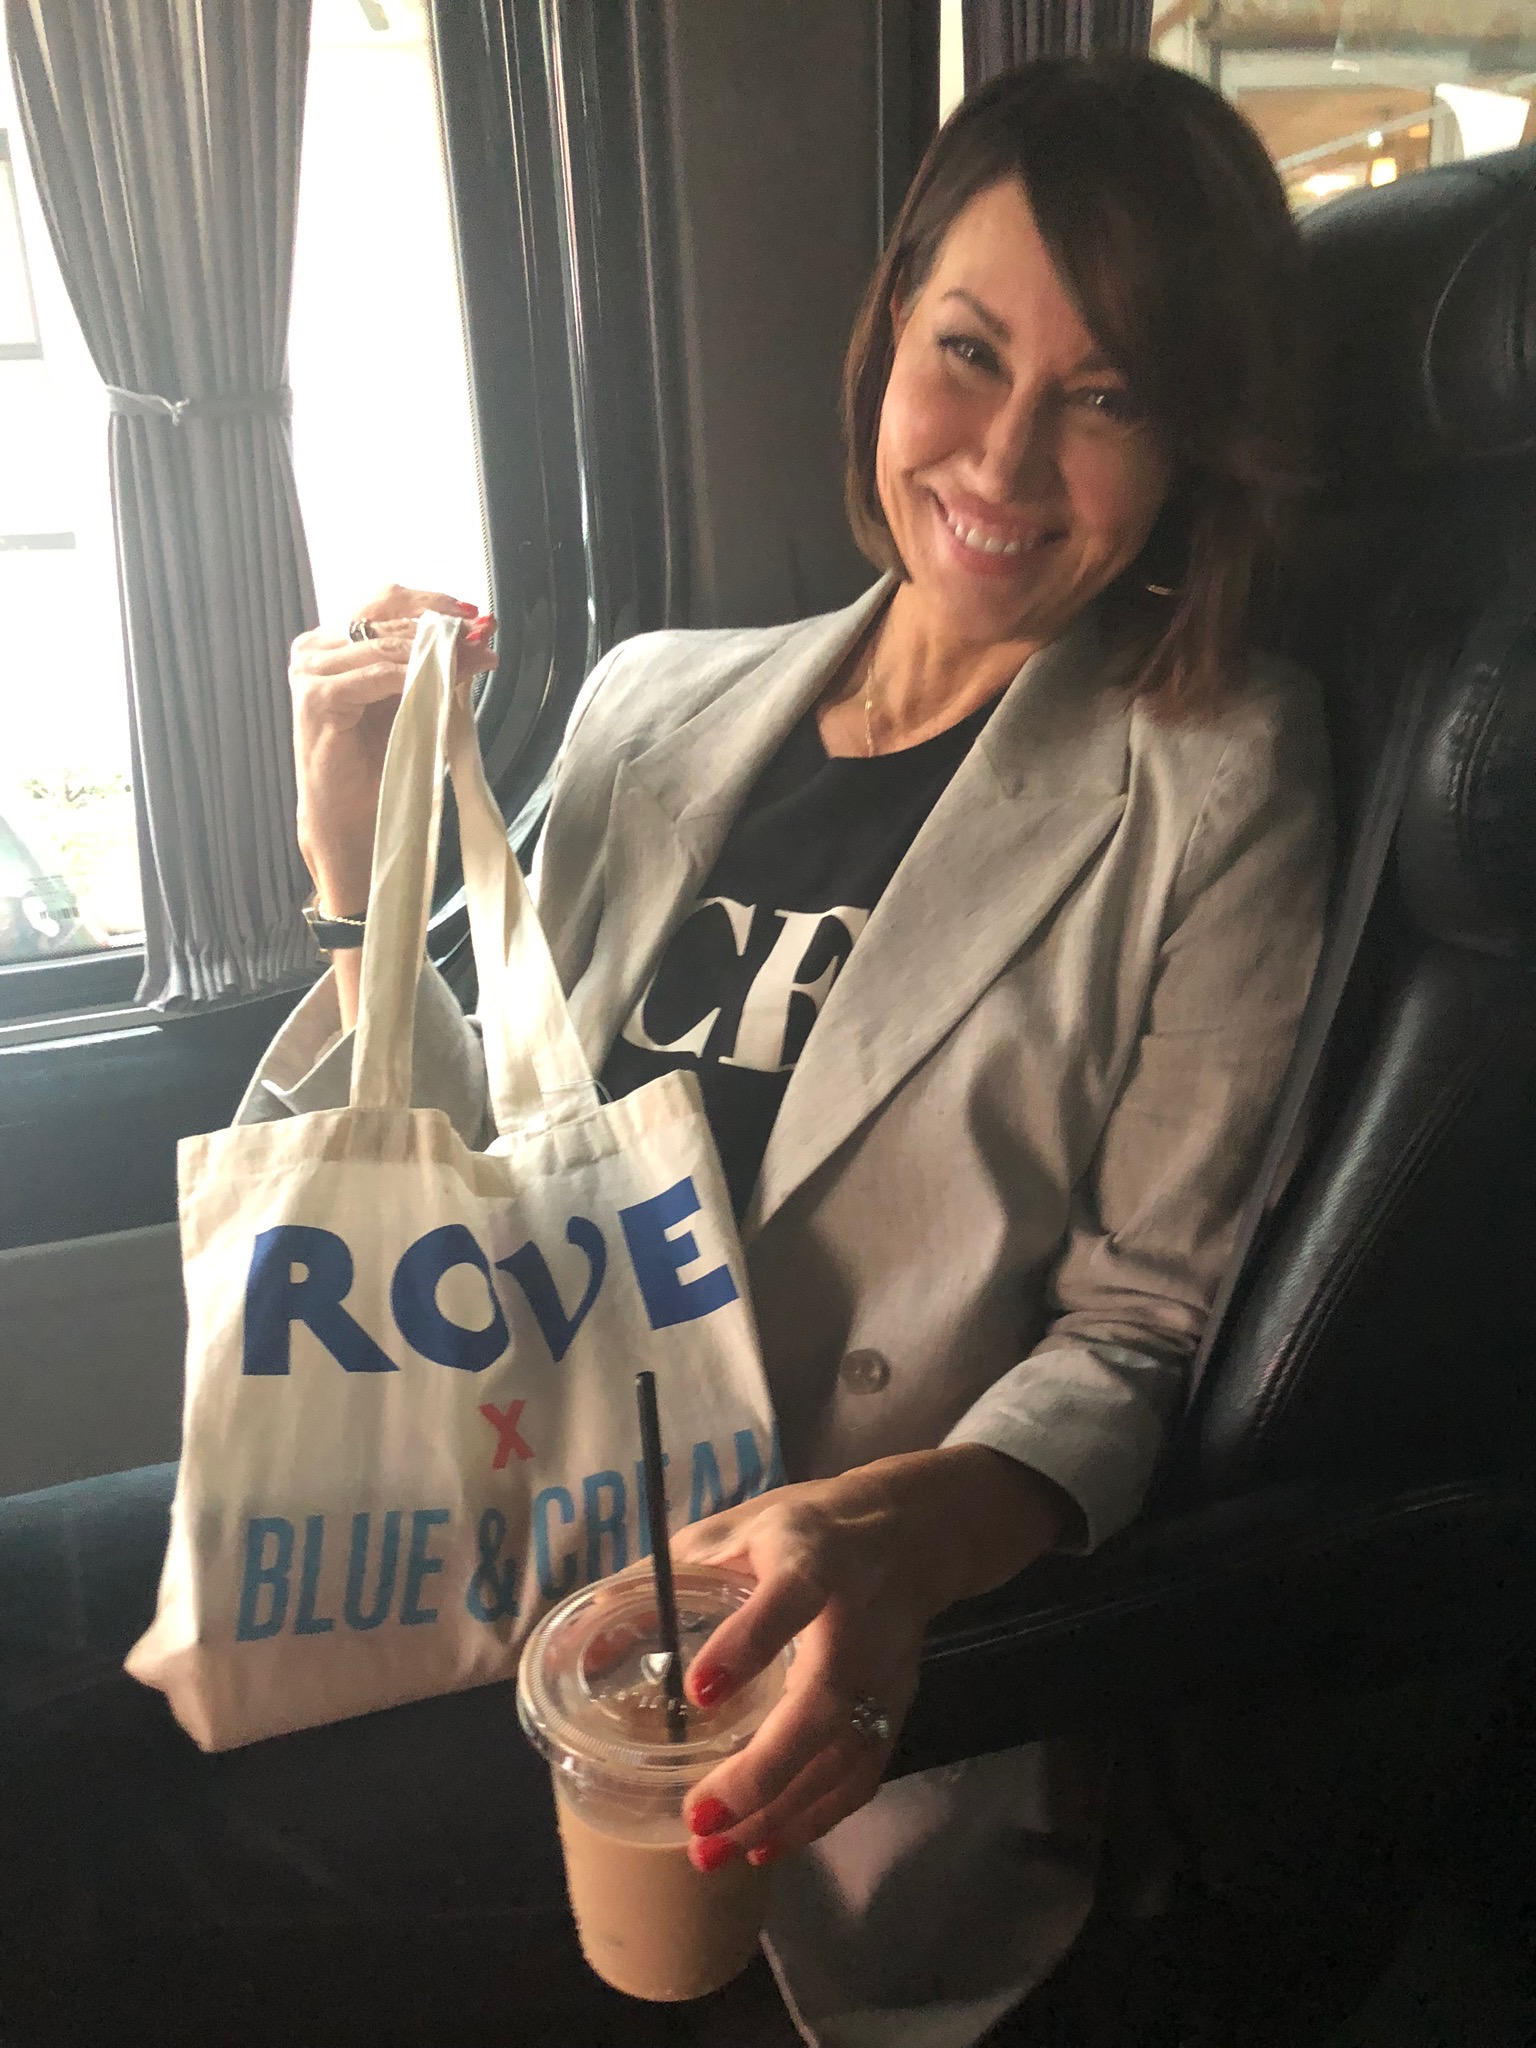 Women sitting in a bus holding up a goodie bag and holding an iced coffee